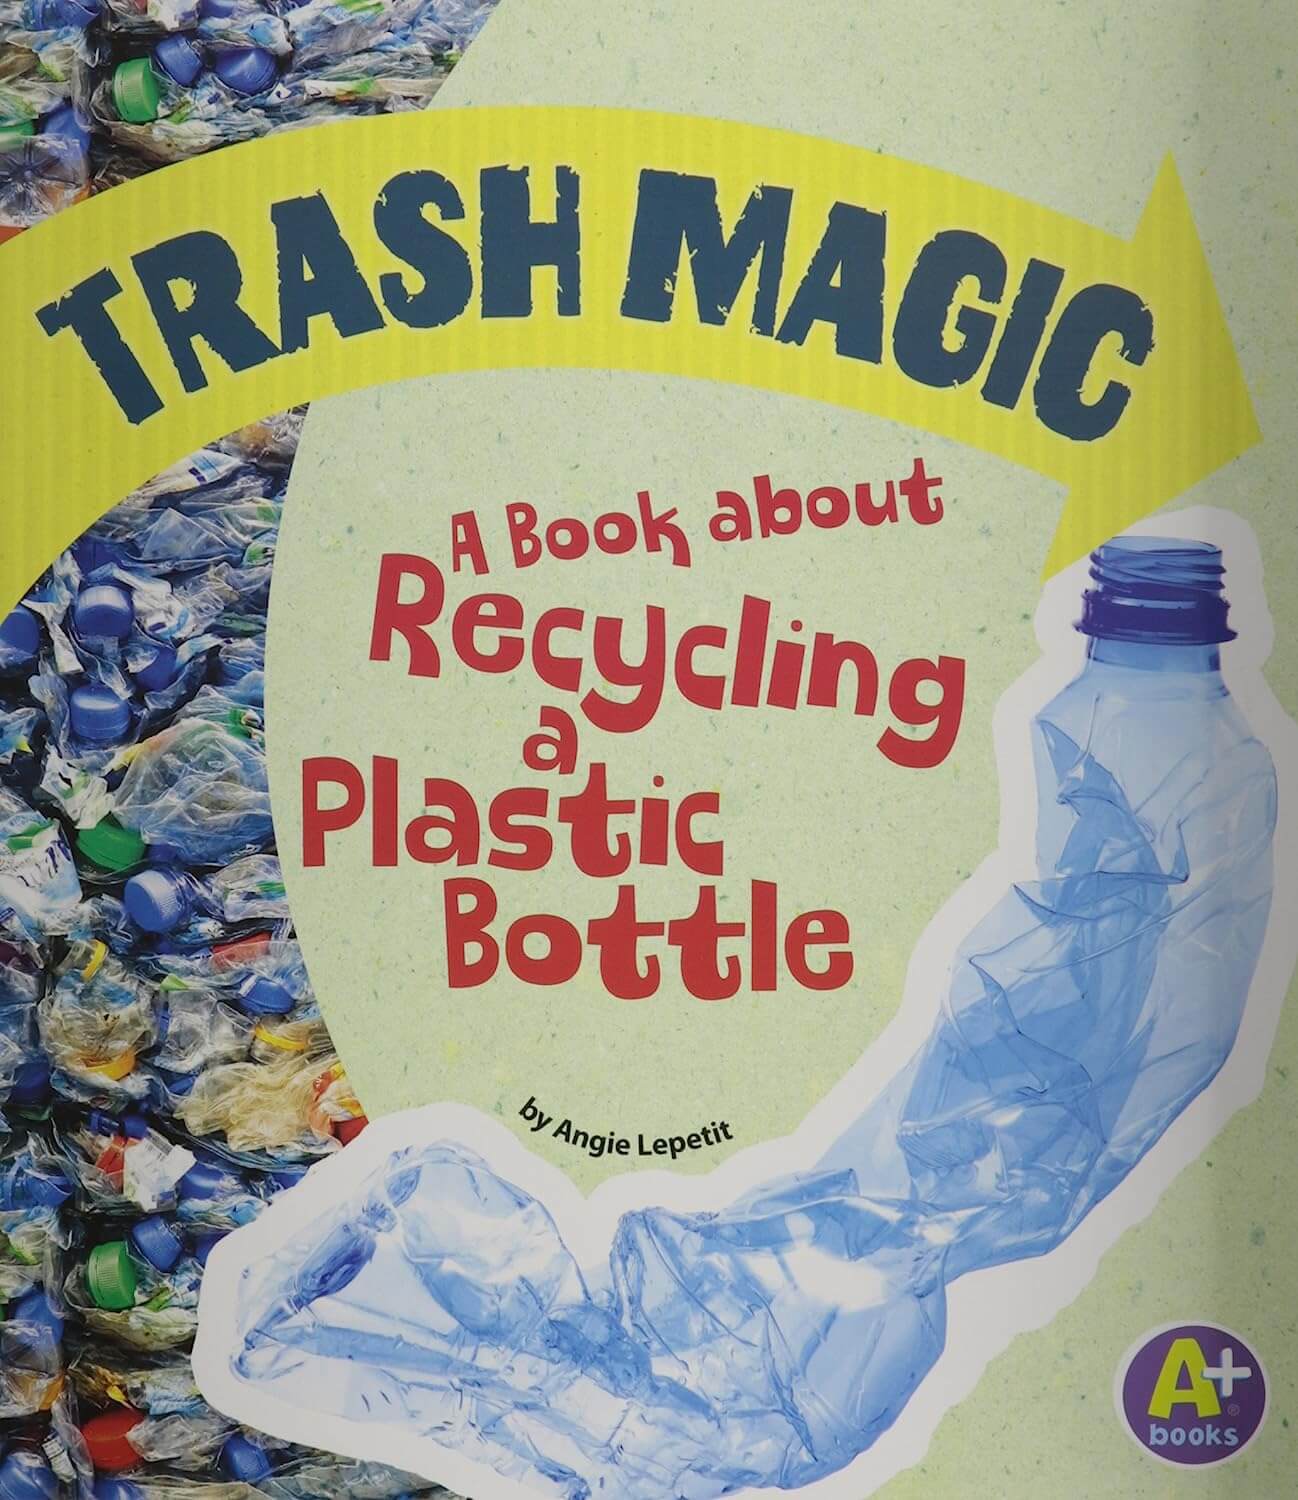 Trash Magic: A book about recycling a plastic bottle by Angie Lepatite